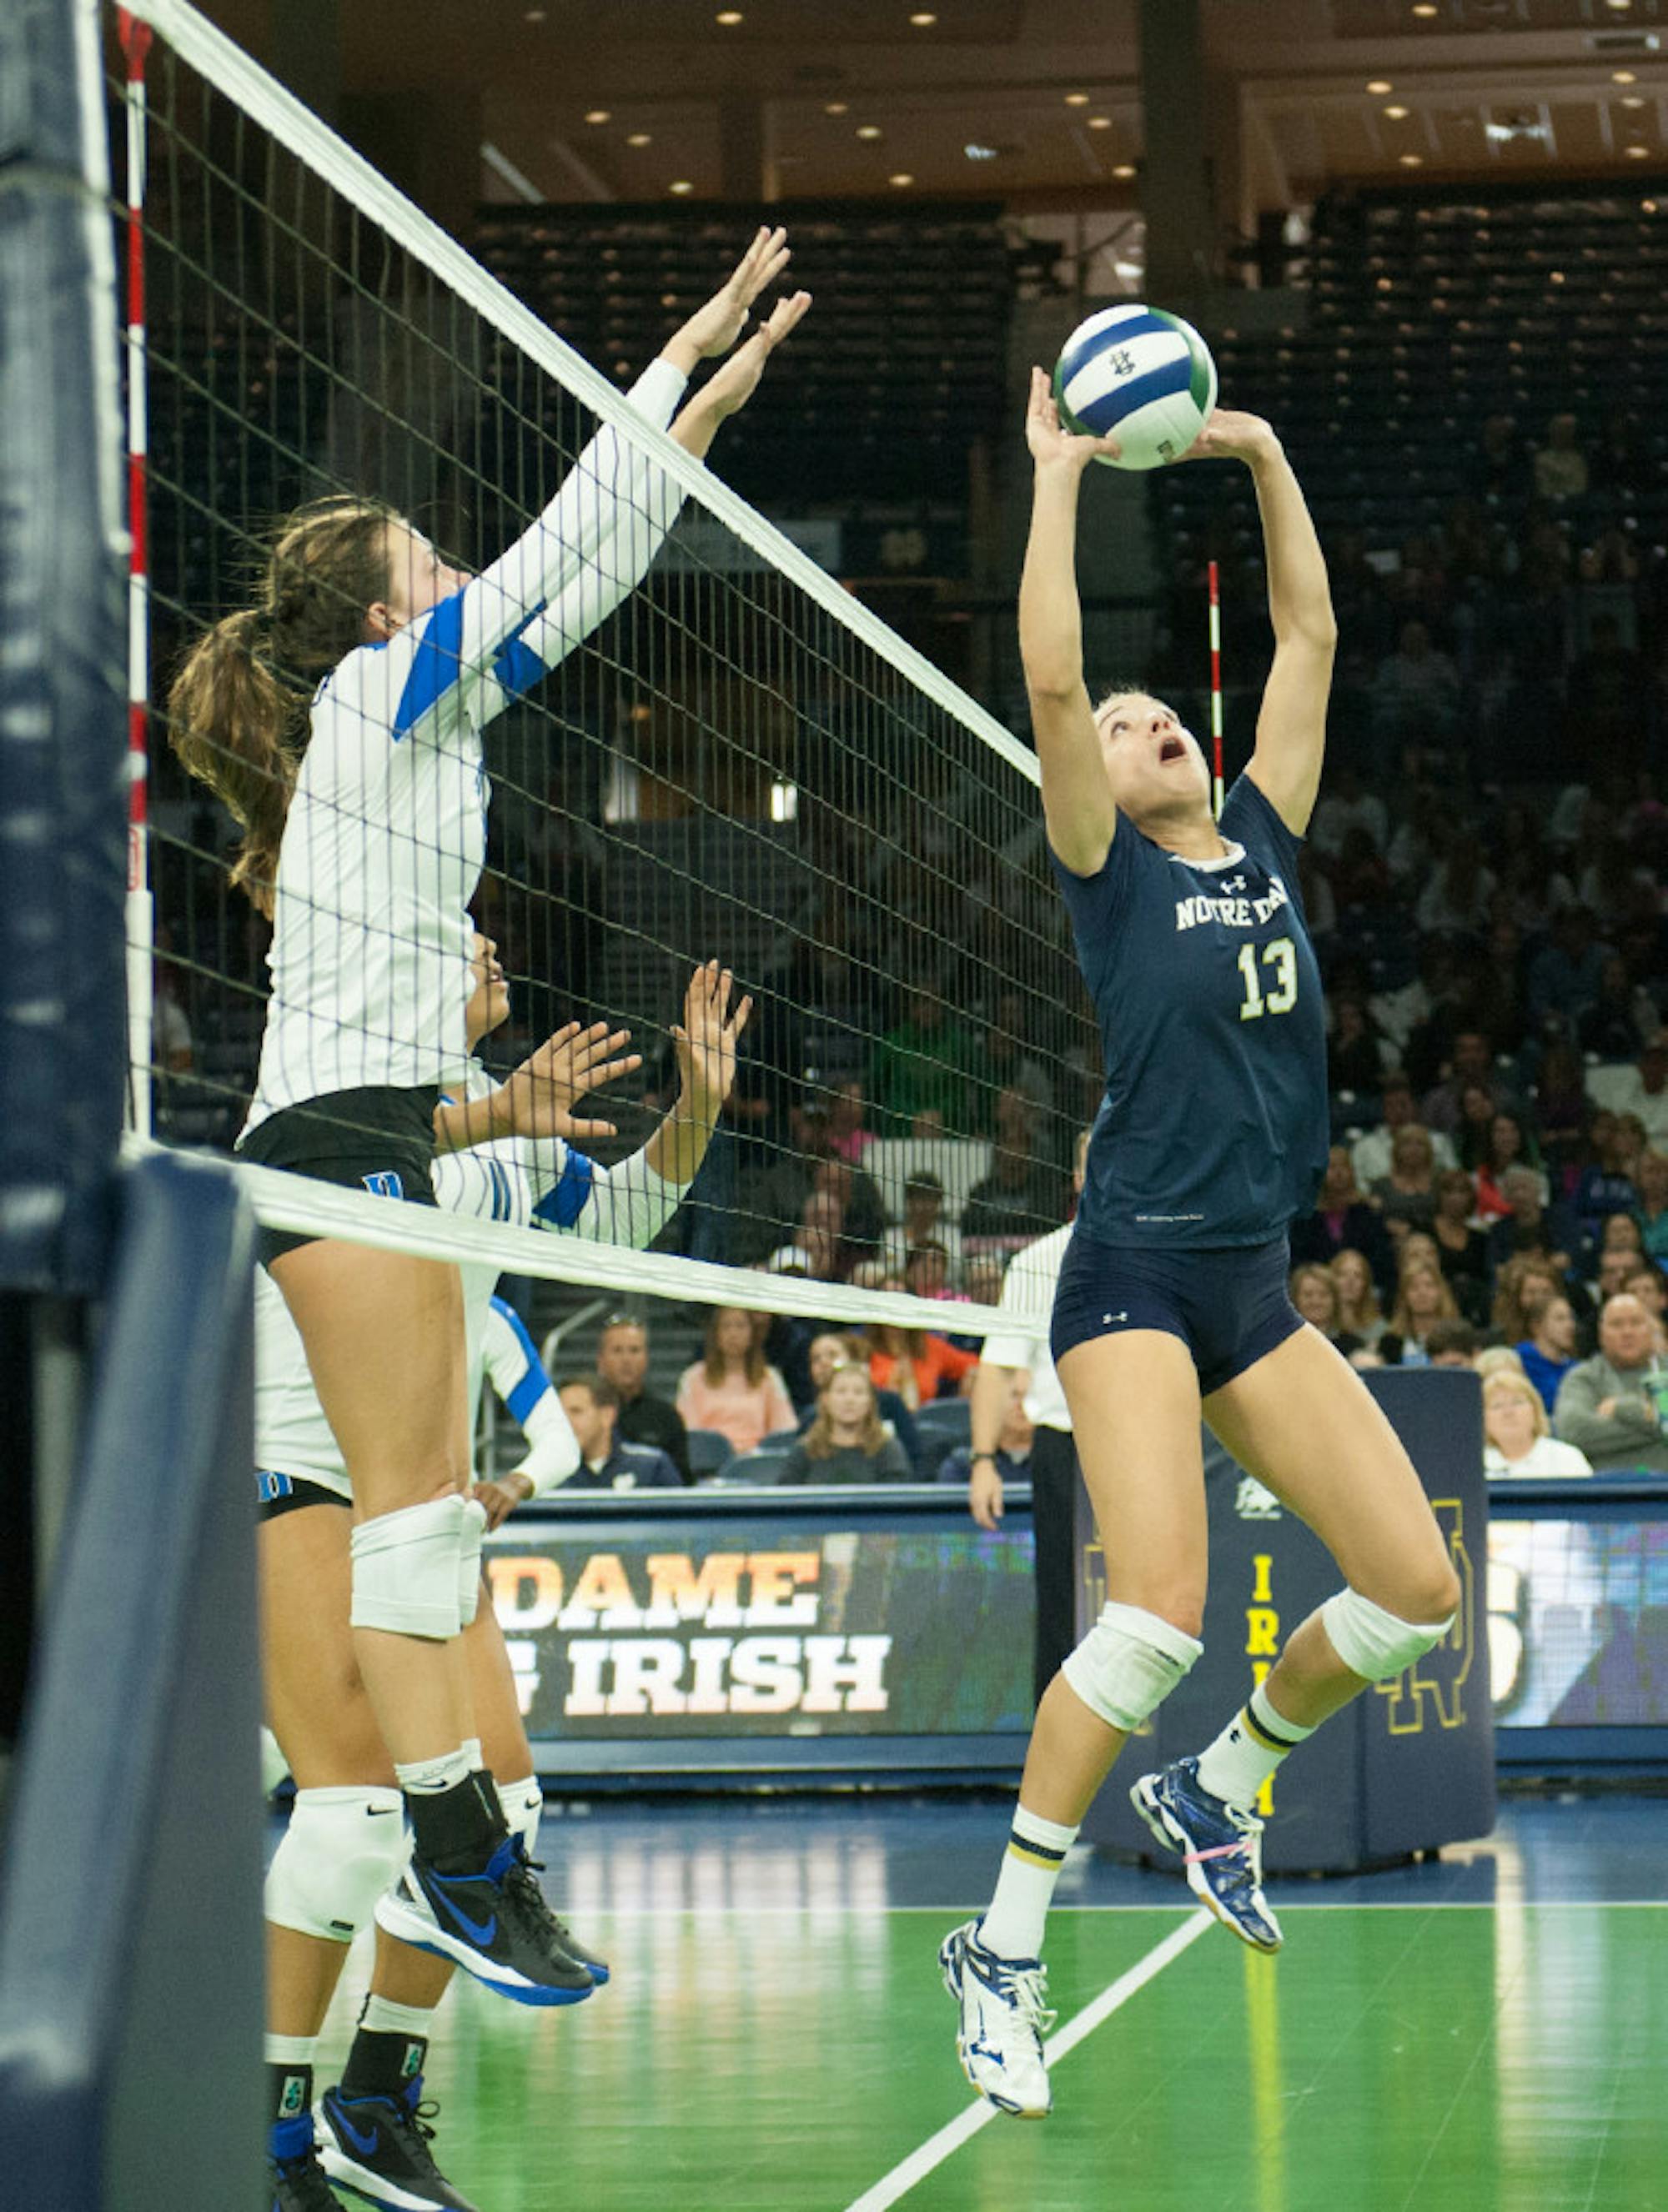 Irish junior setter Hanna Muzzonigro sets the ball to a teammate in Notre Dame’s 3-1 loss to Duke on Oct. 5 at Purcell Pavilion.